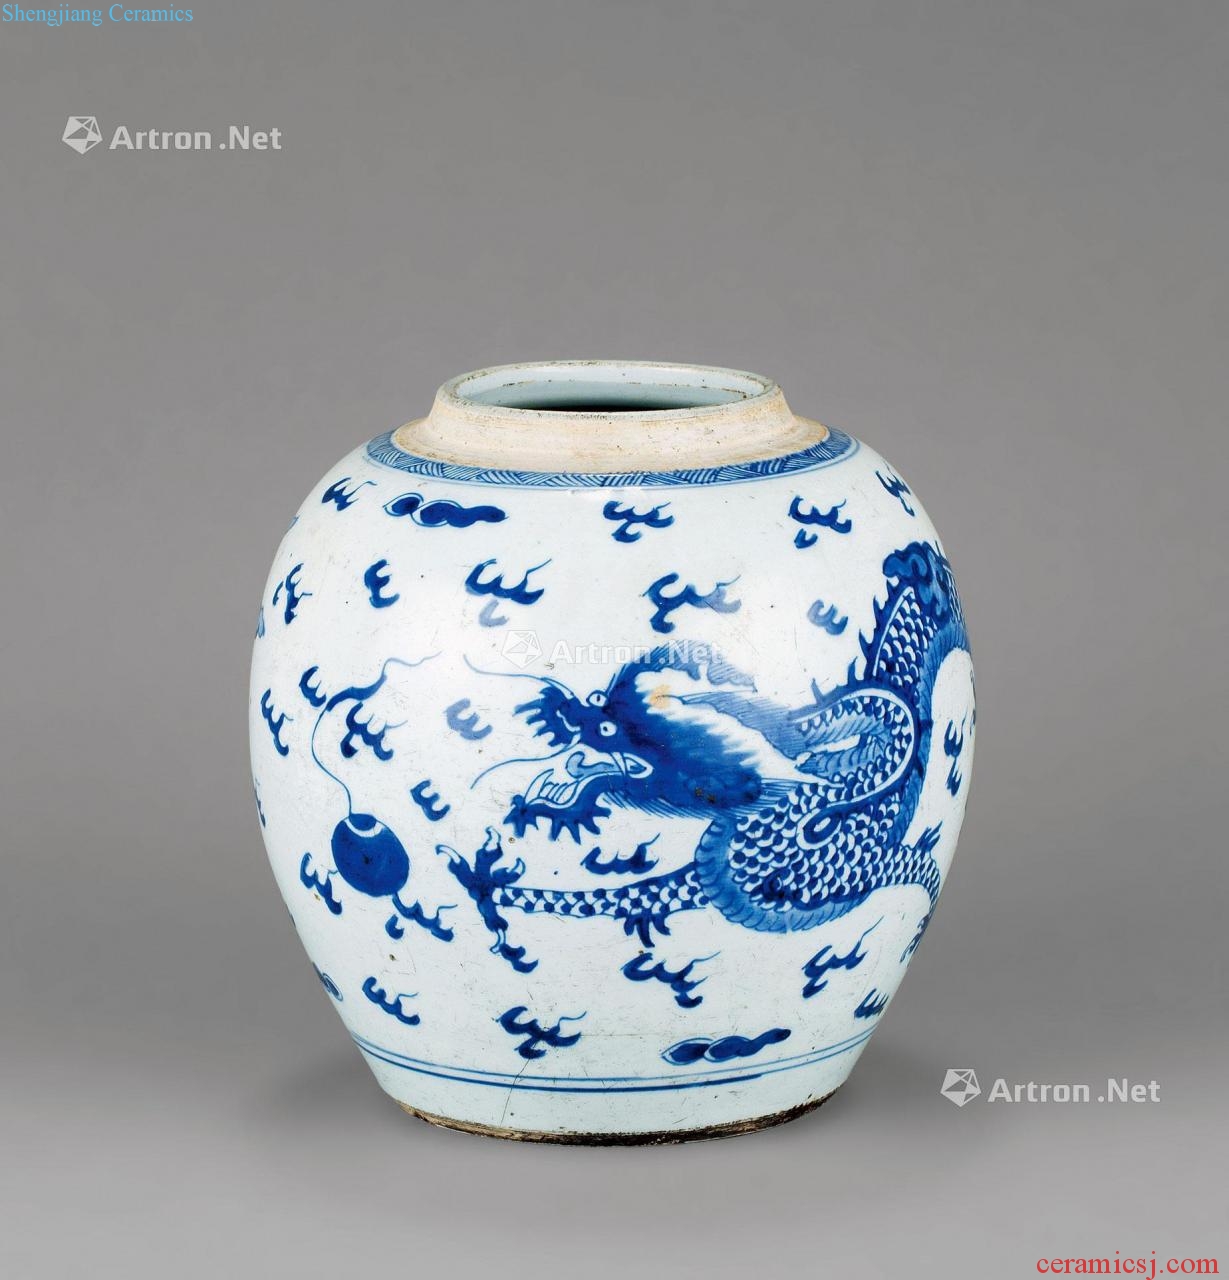 In the qing dynasty Blue and white dragon tank